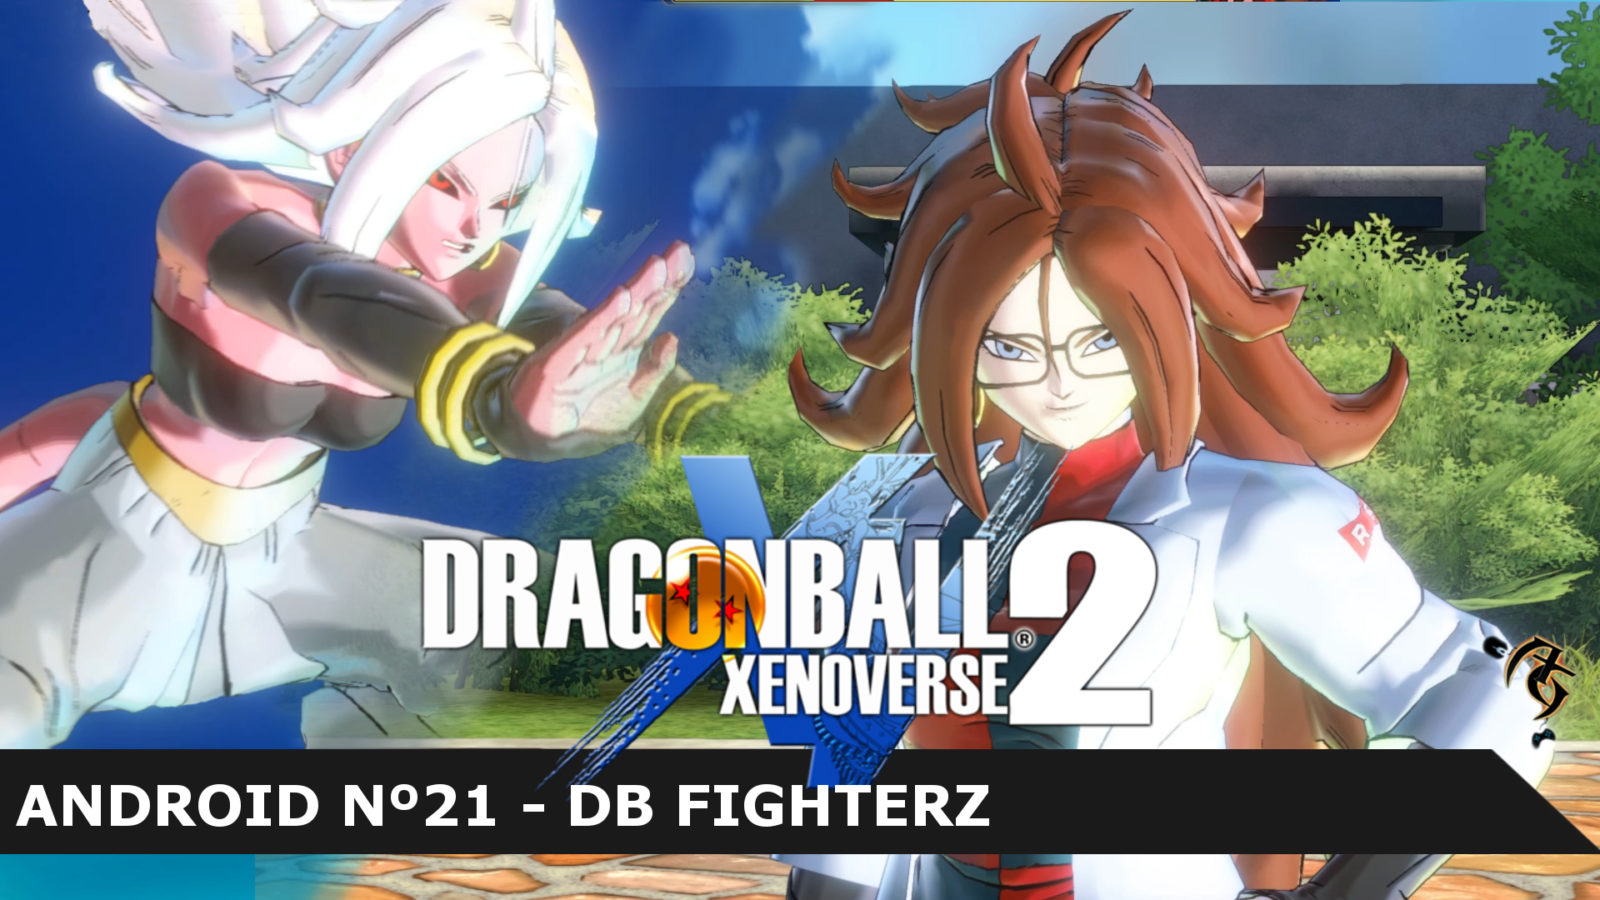 How to download dragon ball xenoverse for android